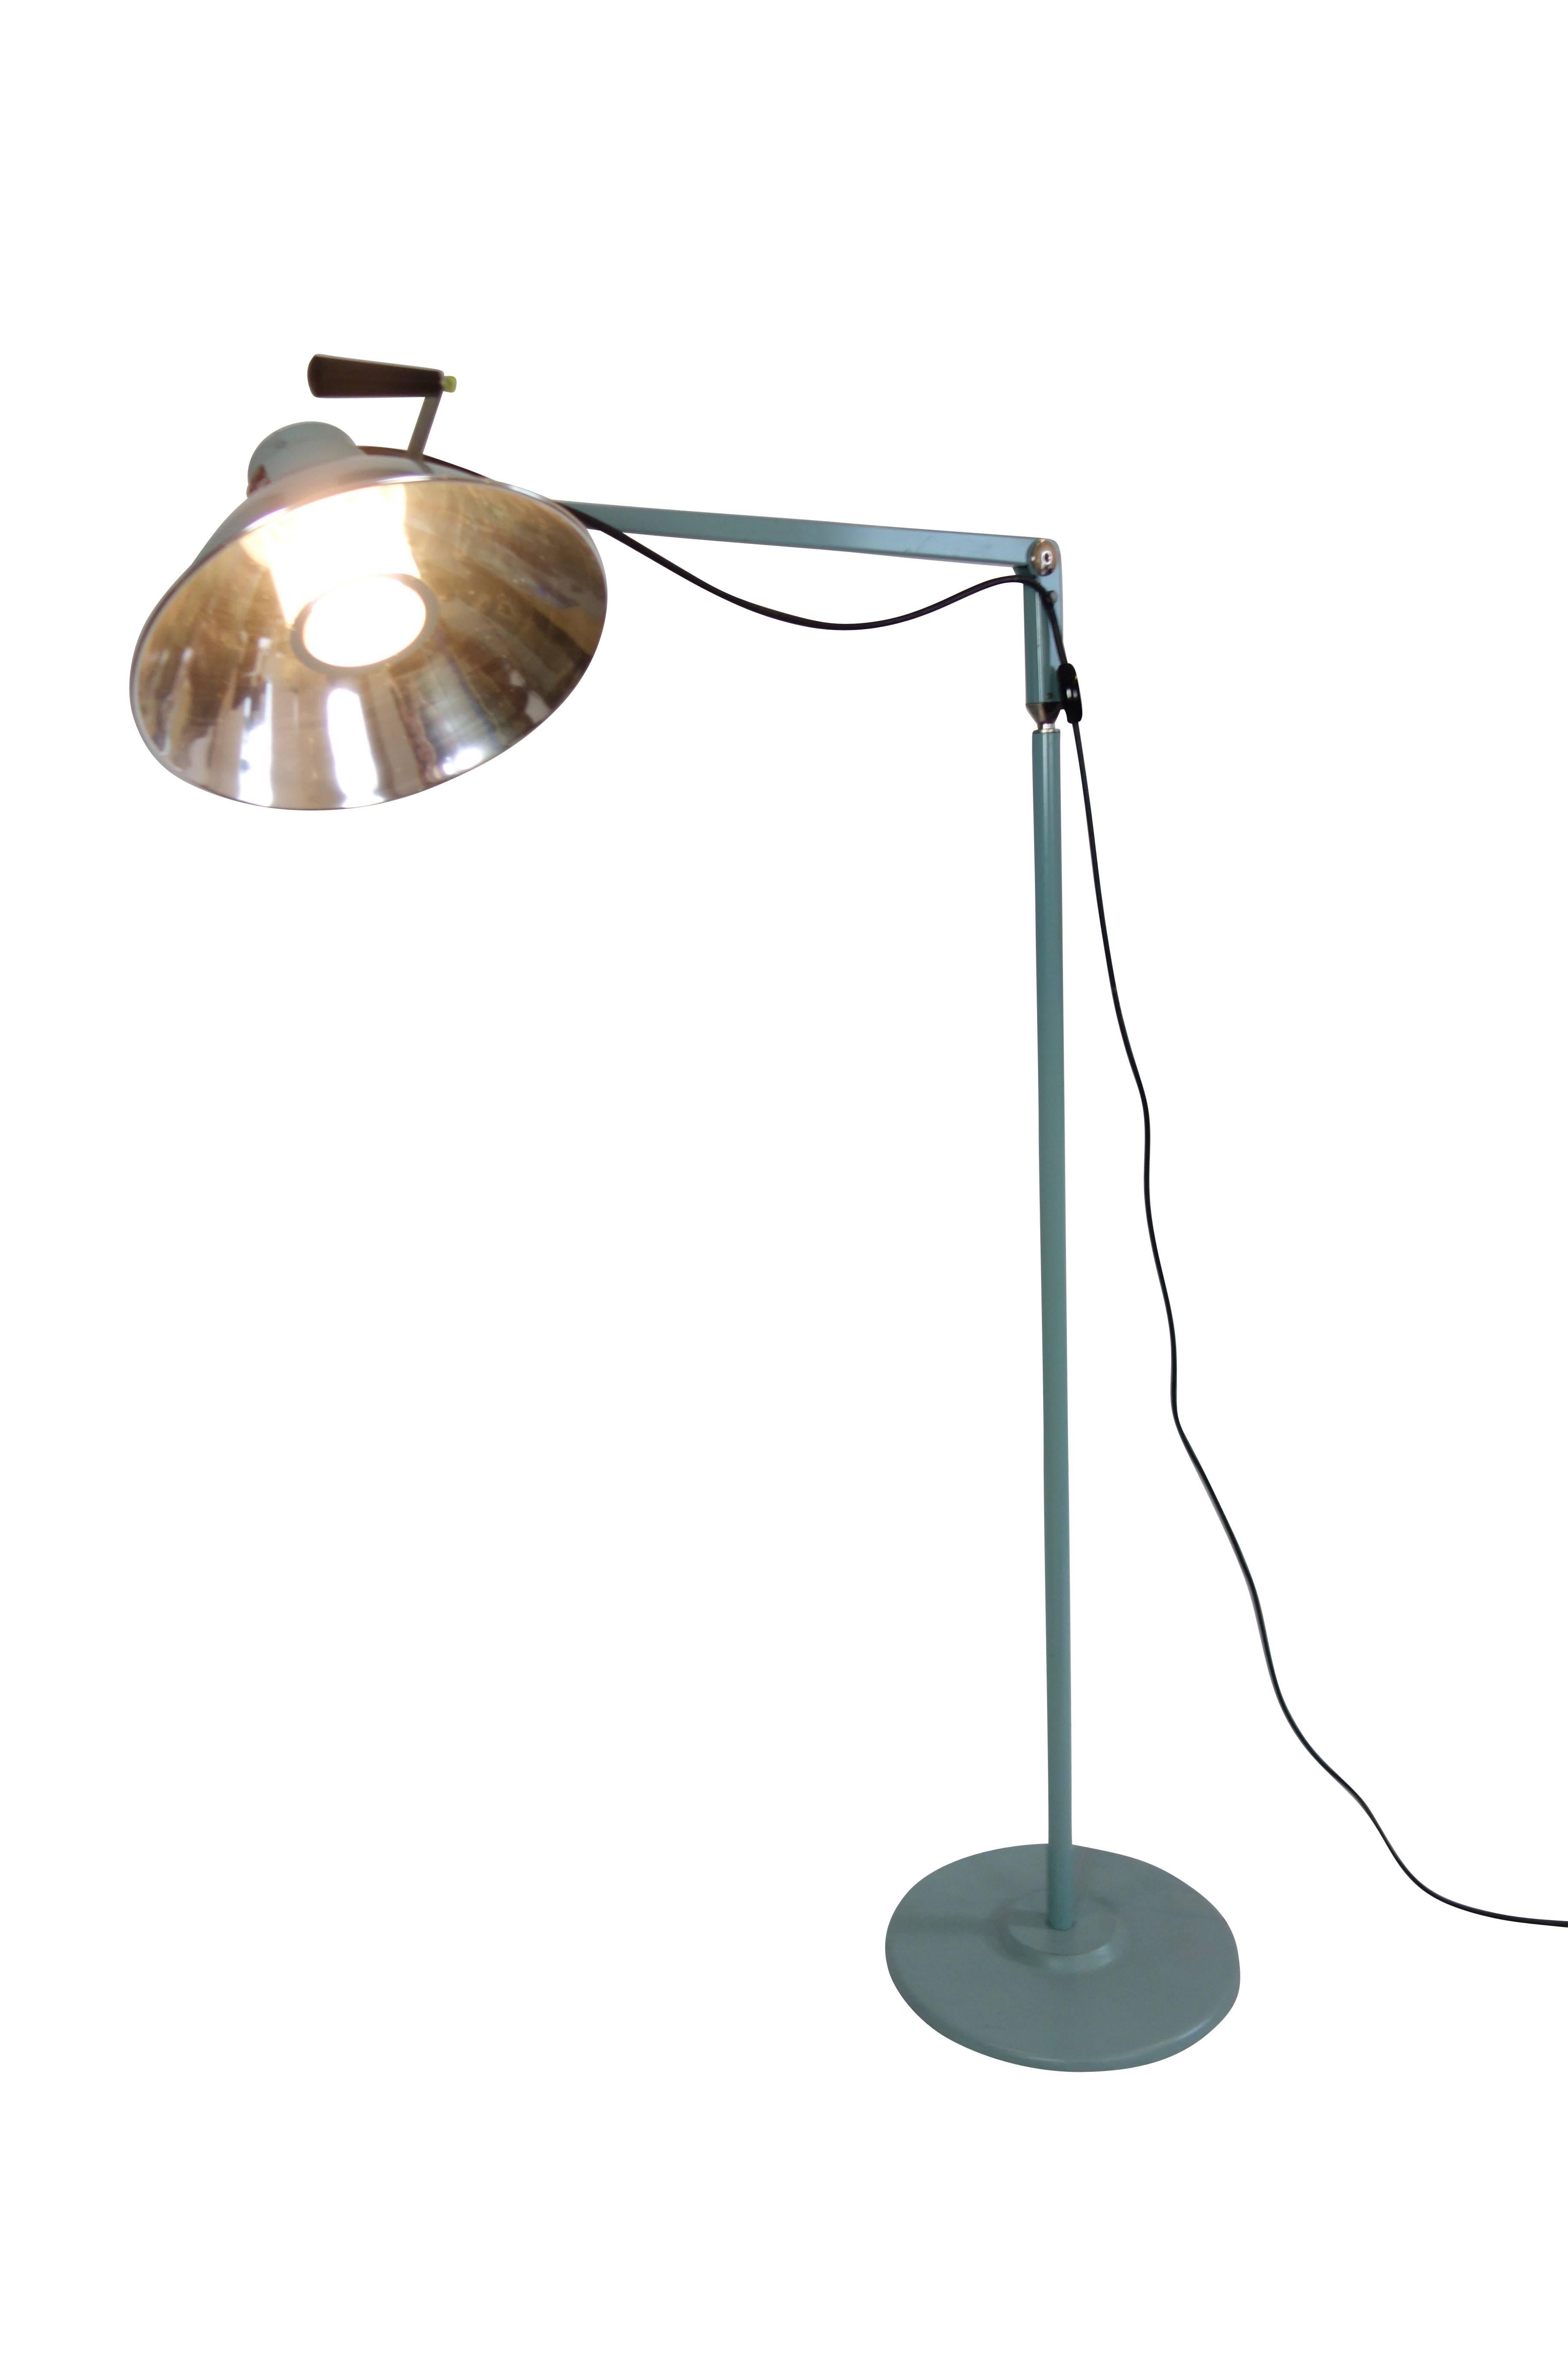 This is a Mid-Century articulating medical operation and examination floor lamp.